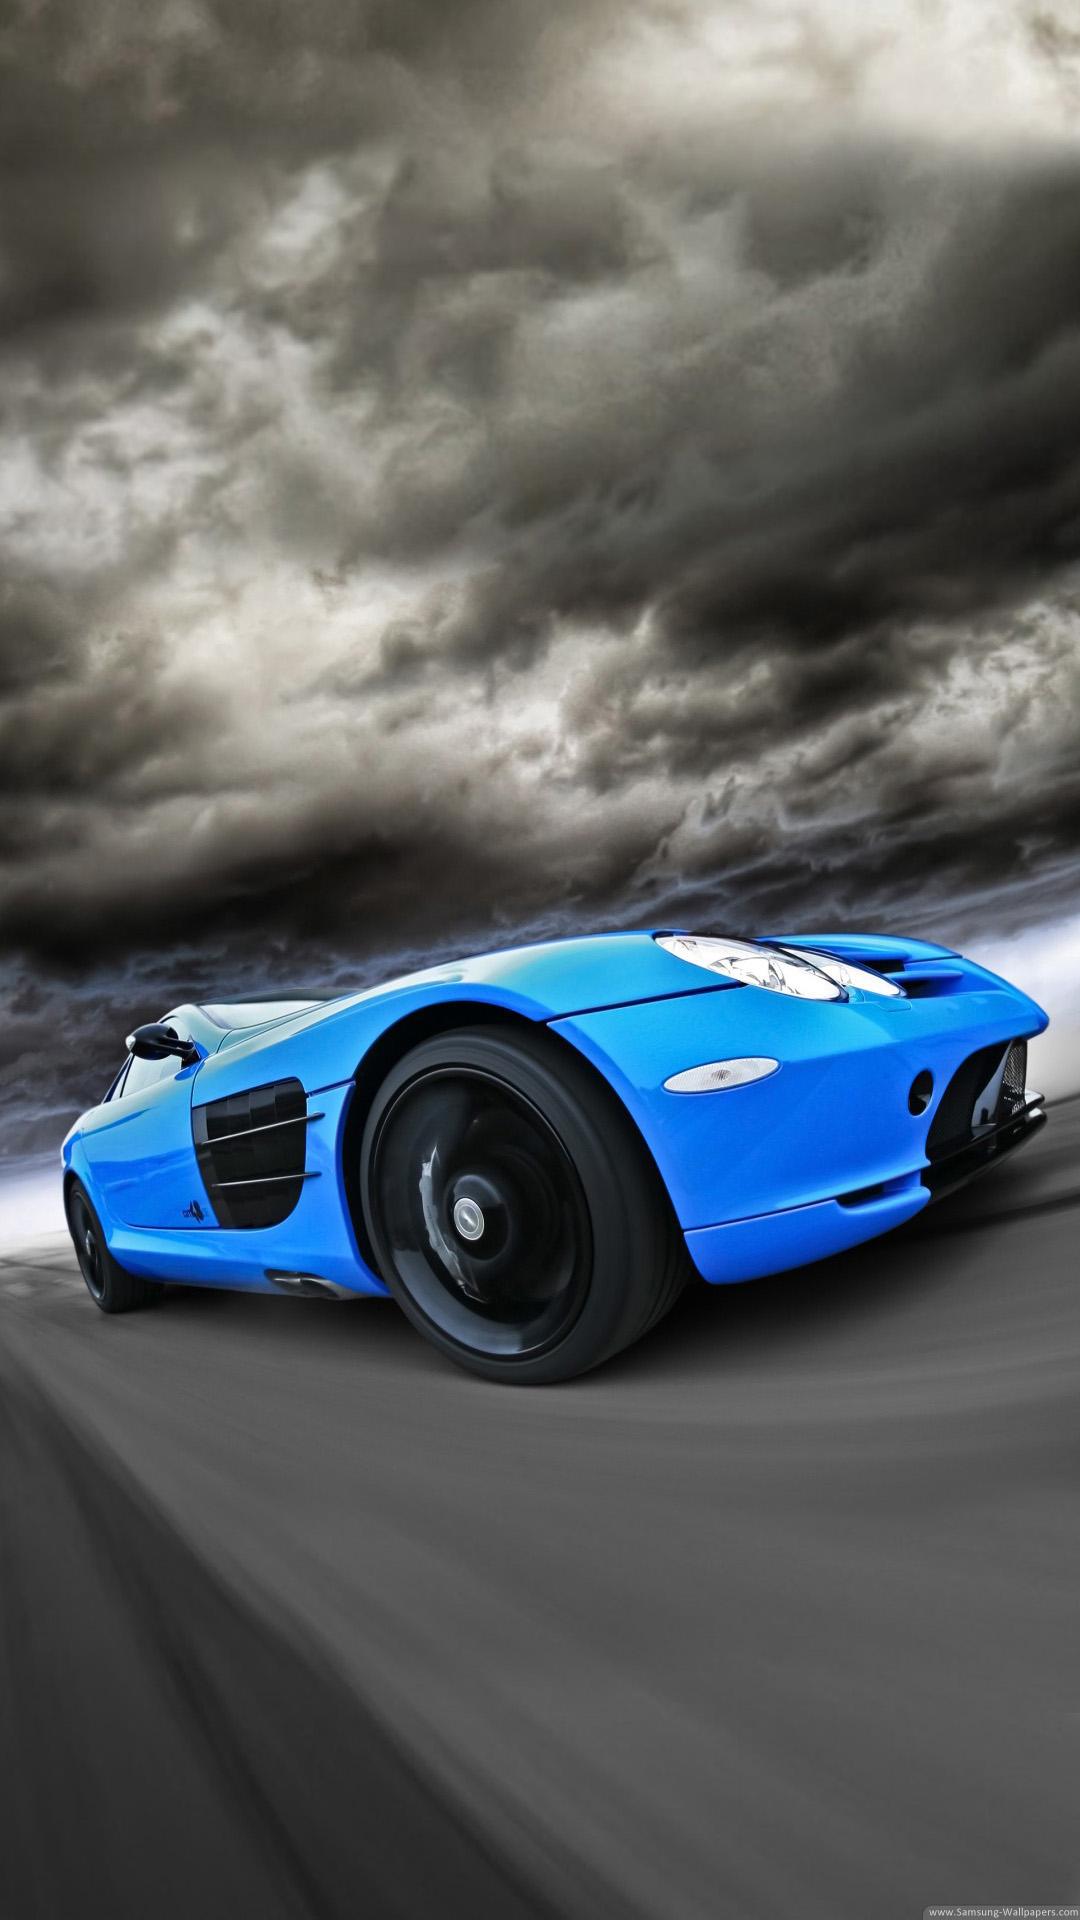 EXOTIC CAR WALLPAPERS FOR THE SPEED LOVERS